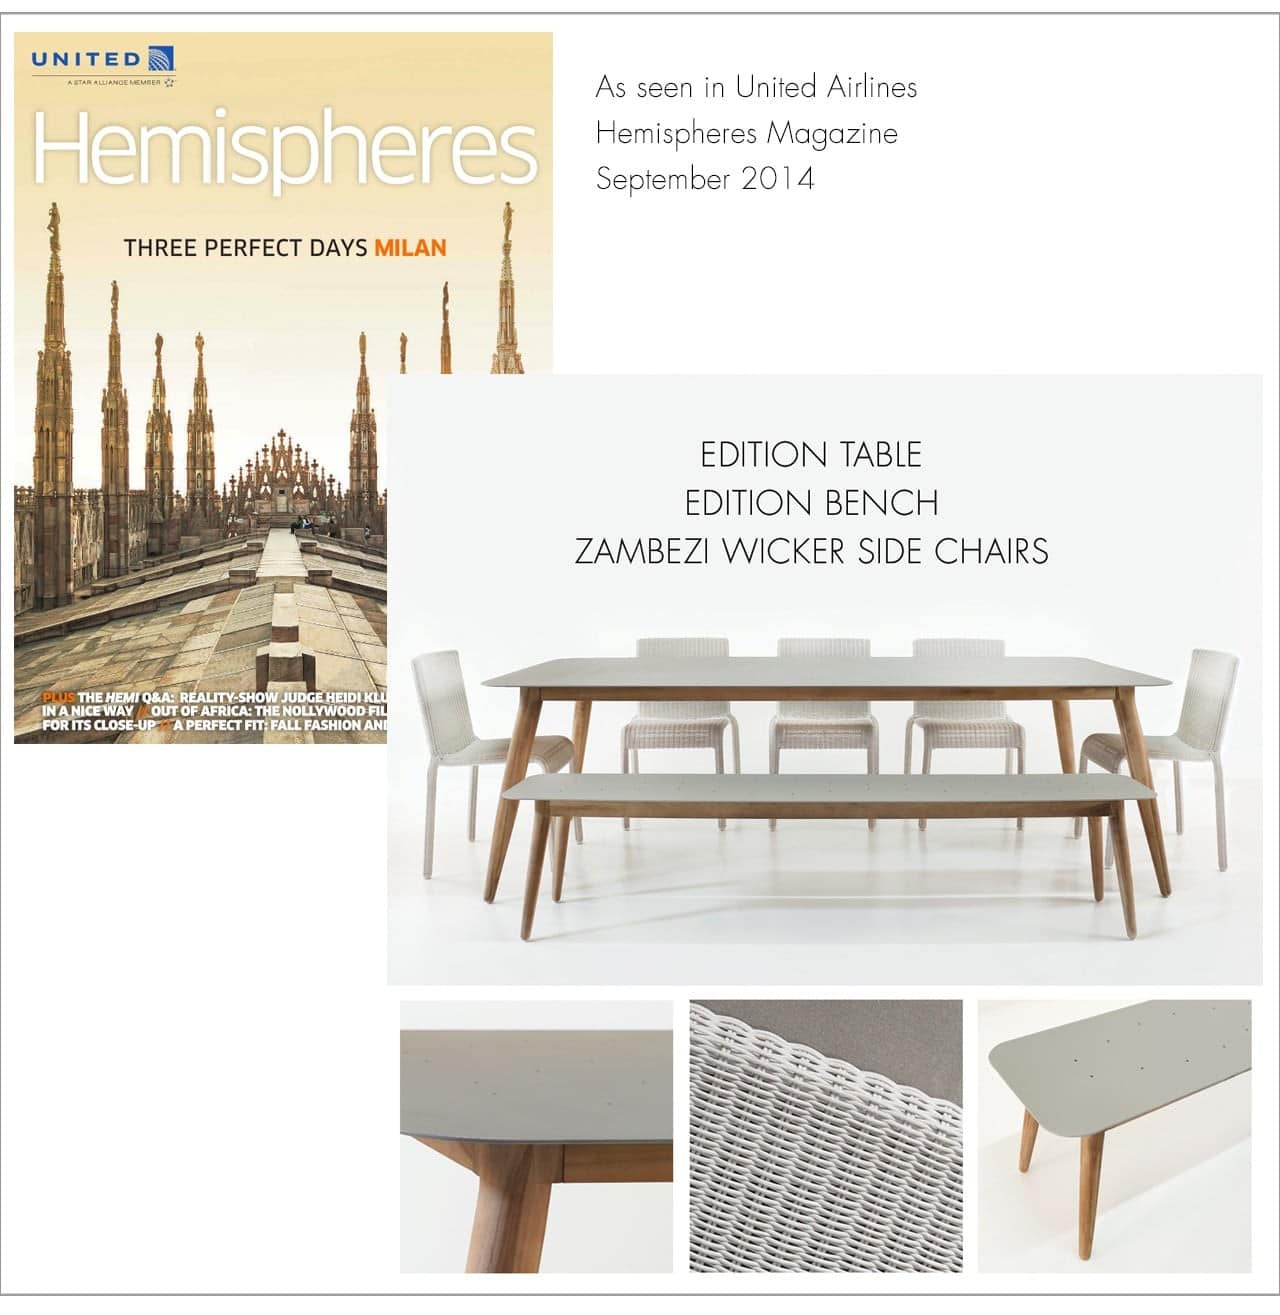 Edition Table and Bench as seen in Hemispheres Magazine